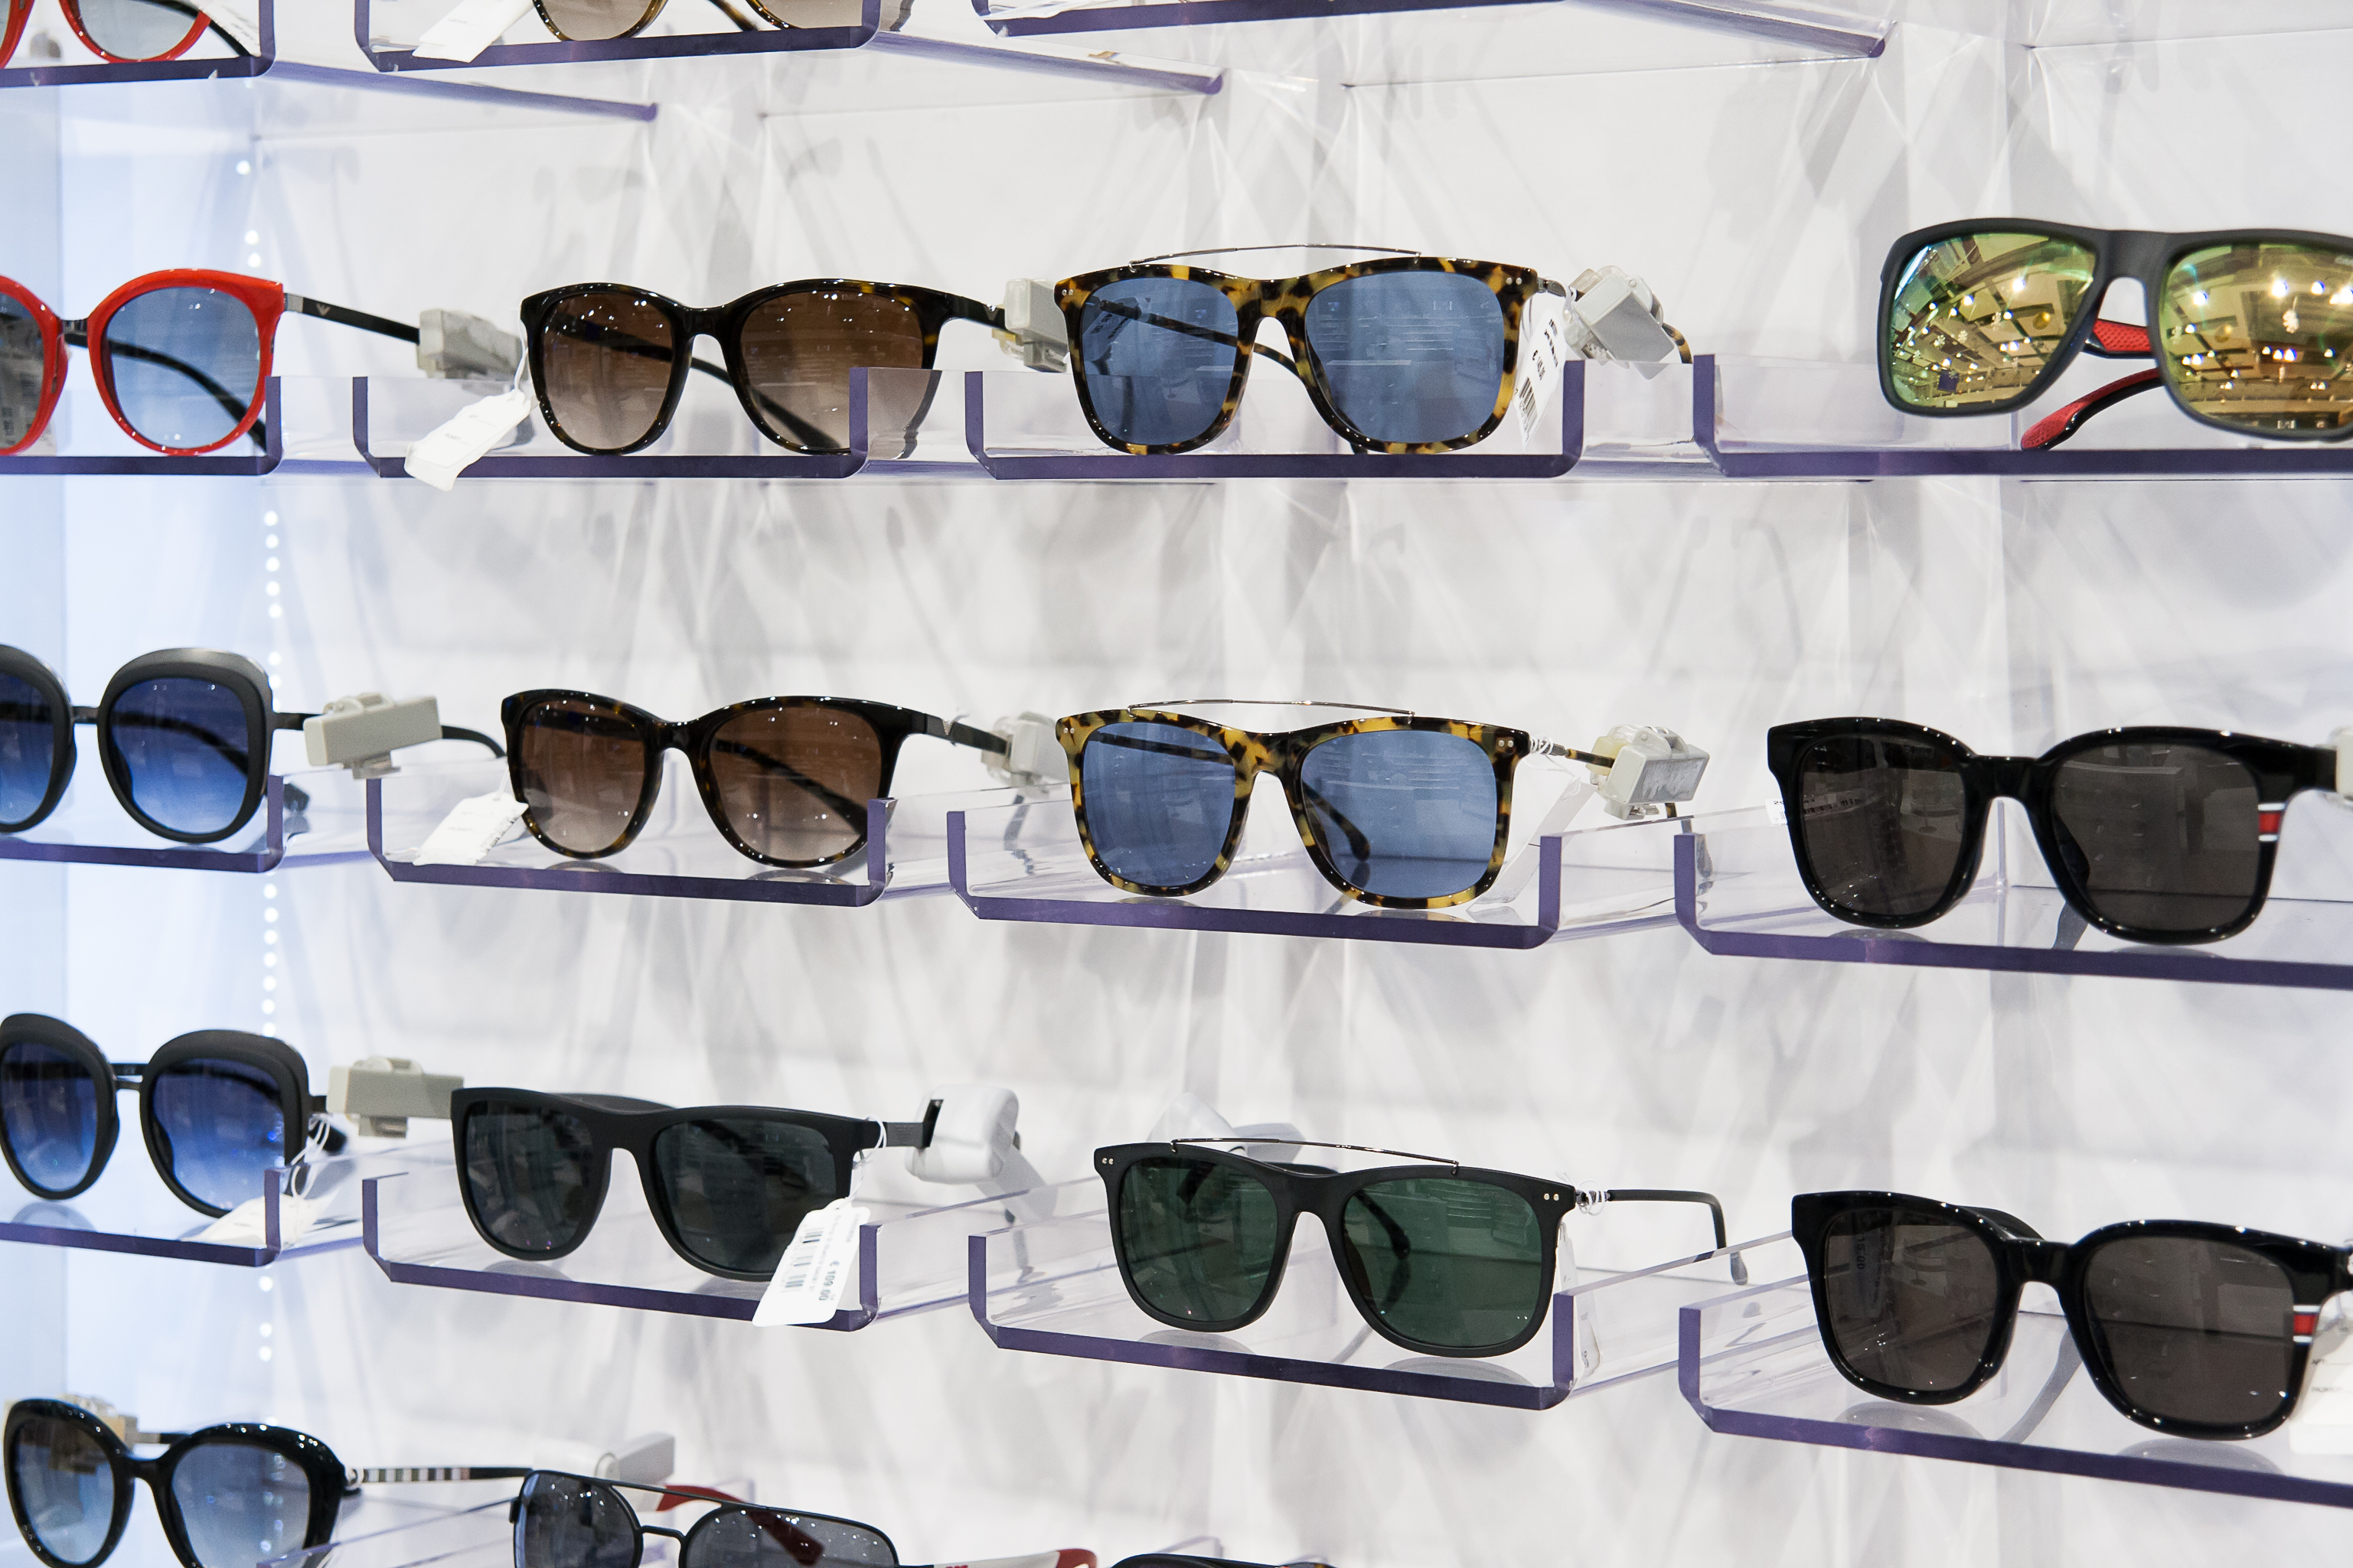 Sunglasses for sale, placed on the shelves